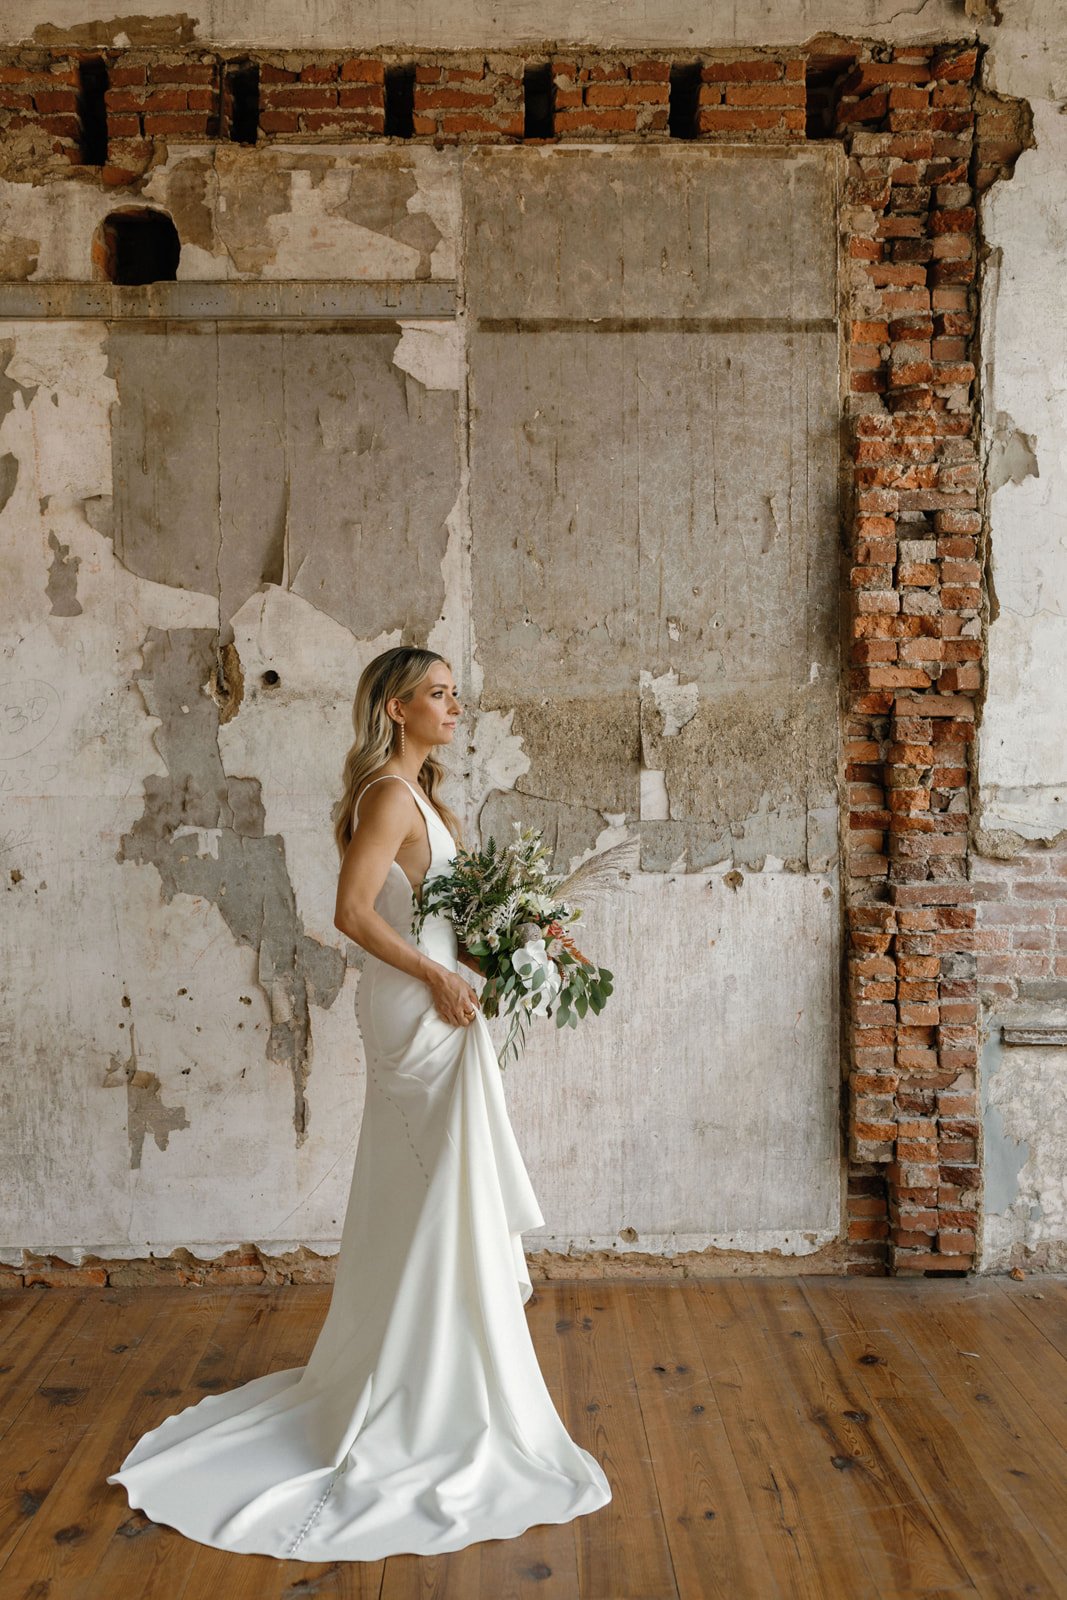 Bride posing in eclectic, unique and historic space